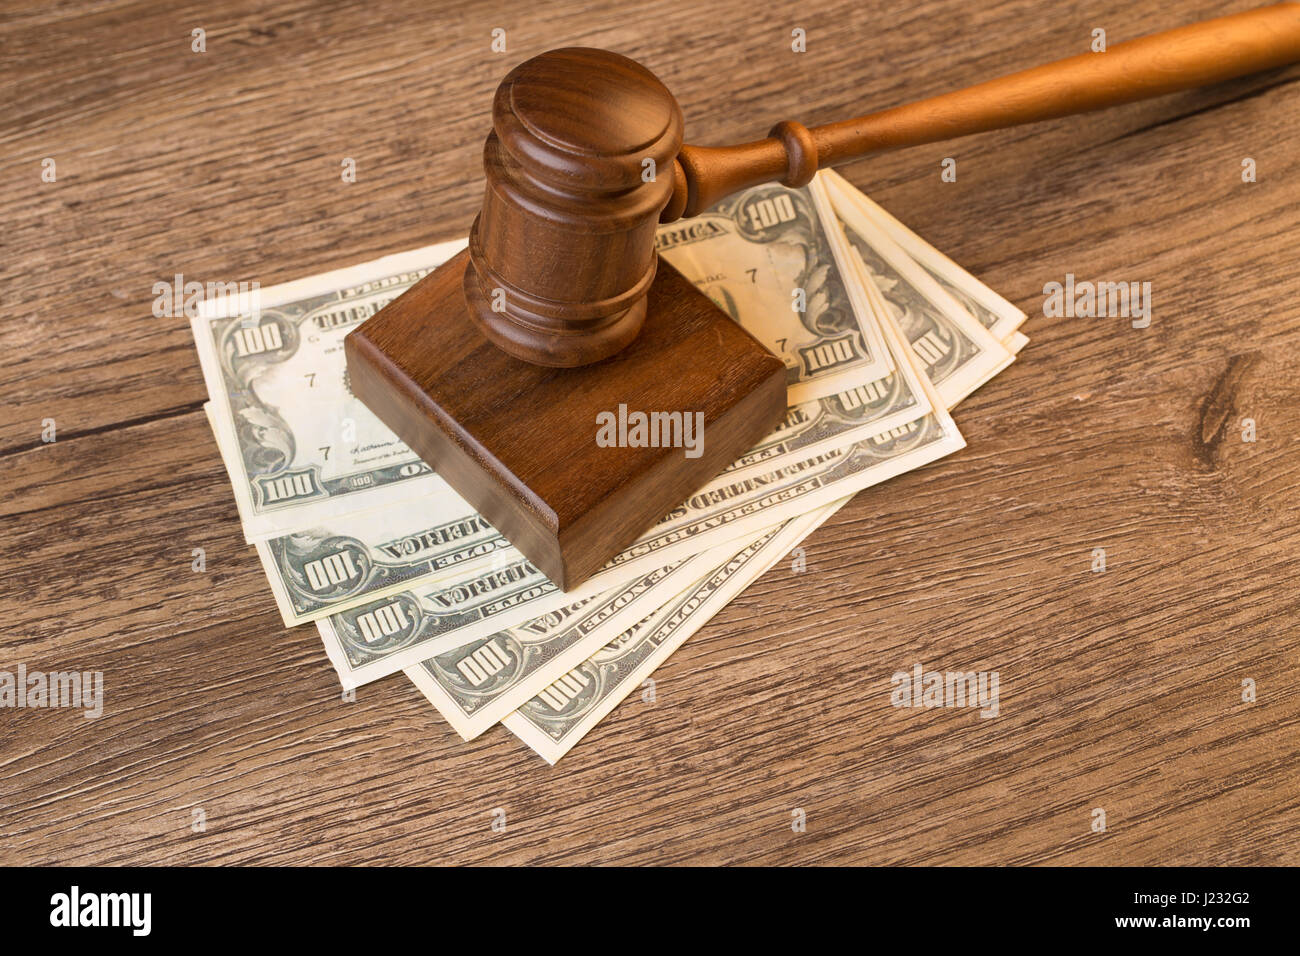 Photo of hammer on banknotes Stock Photo